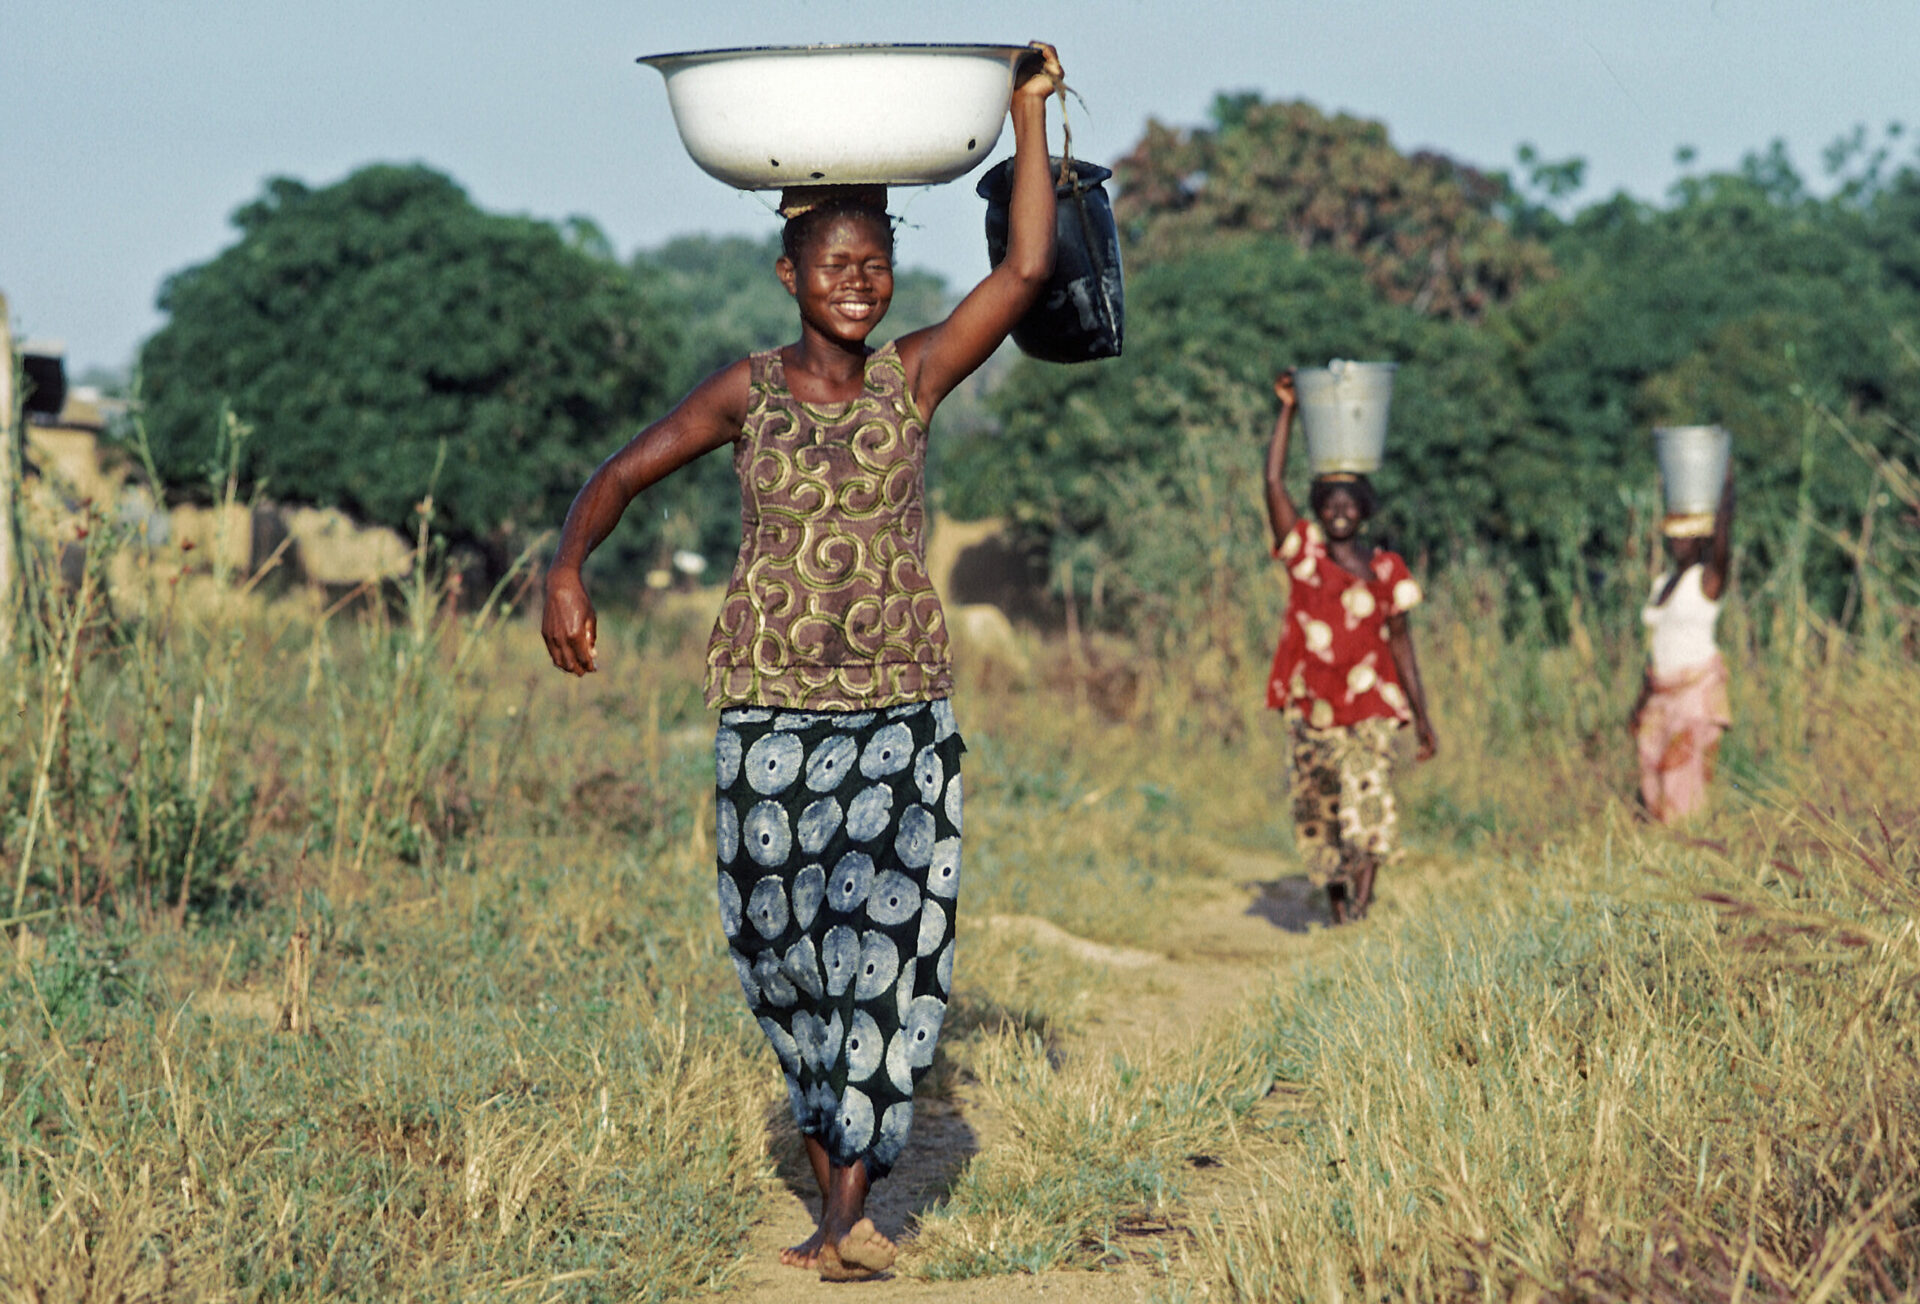 village women carry containers full of water from the well